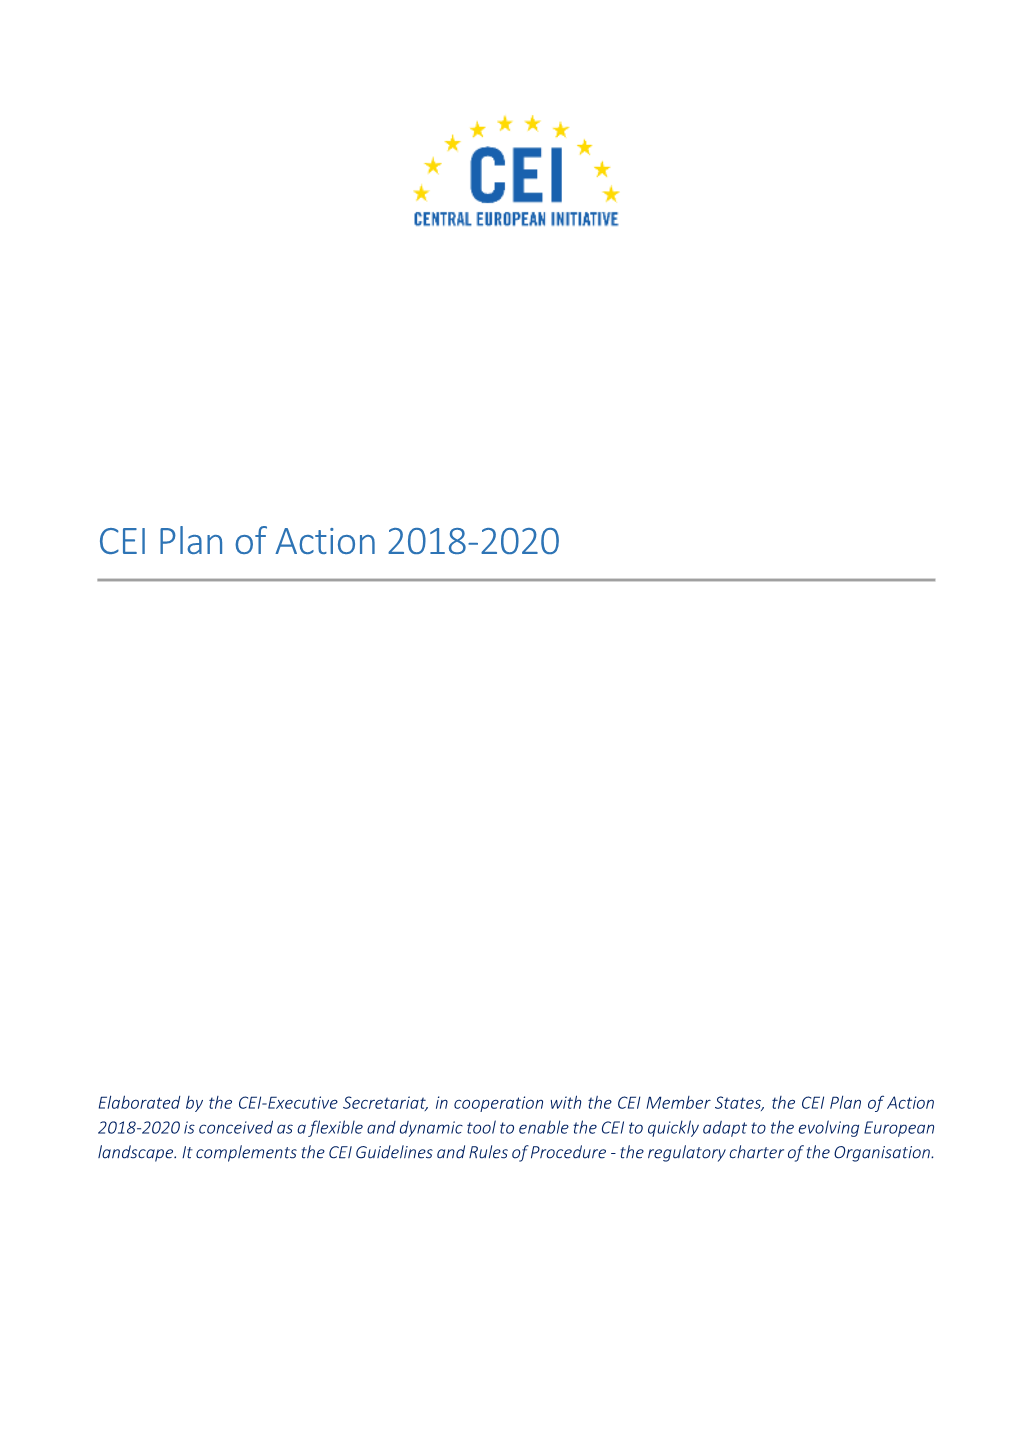 Central European Initiative (CEI) Plan of Action 2018-2020 And